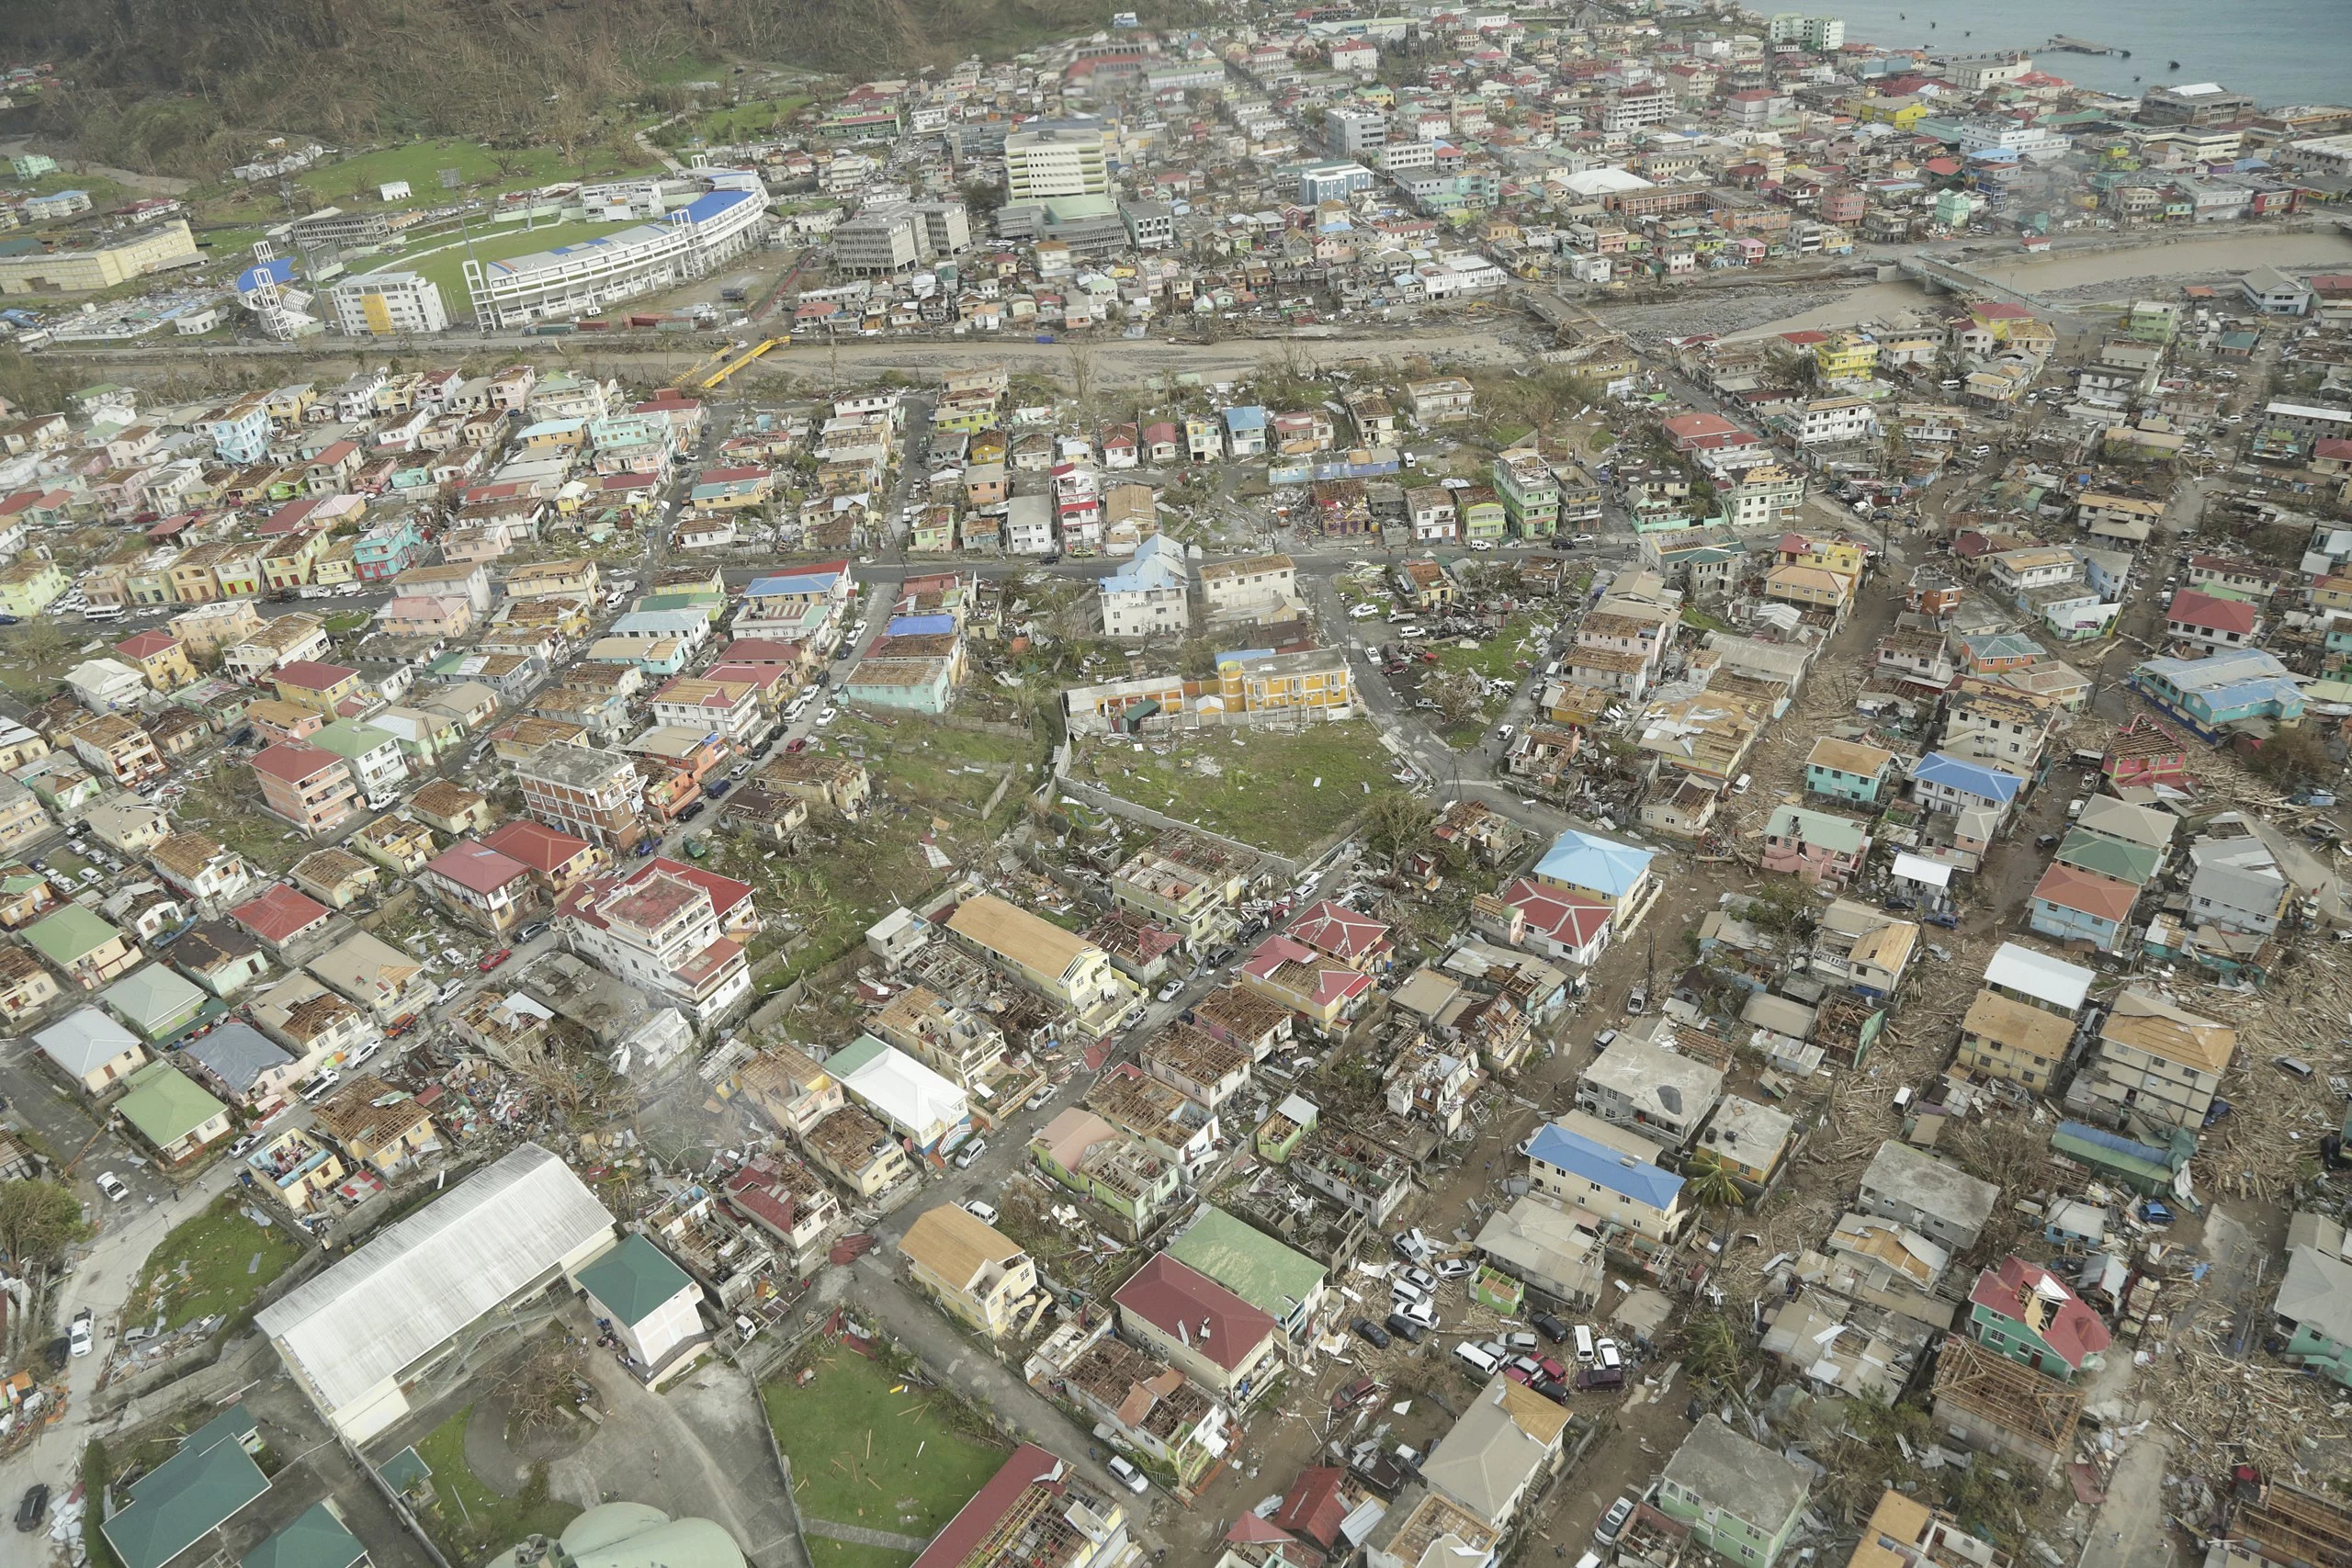 2560px-Aerial view of part of Roseau, the capital city of Dominica